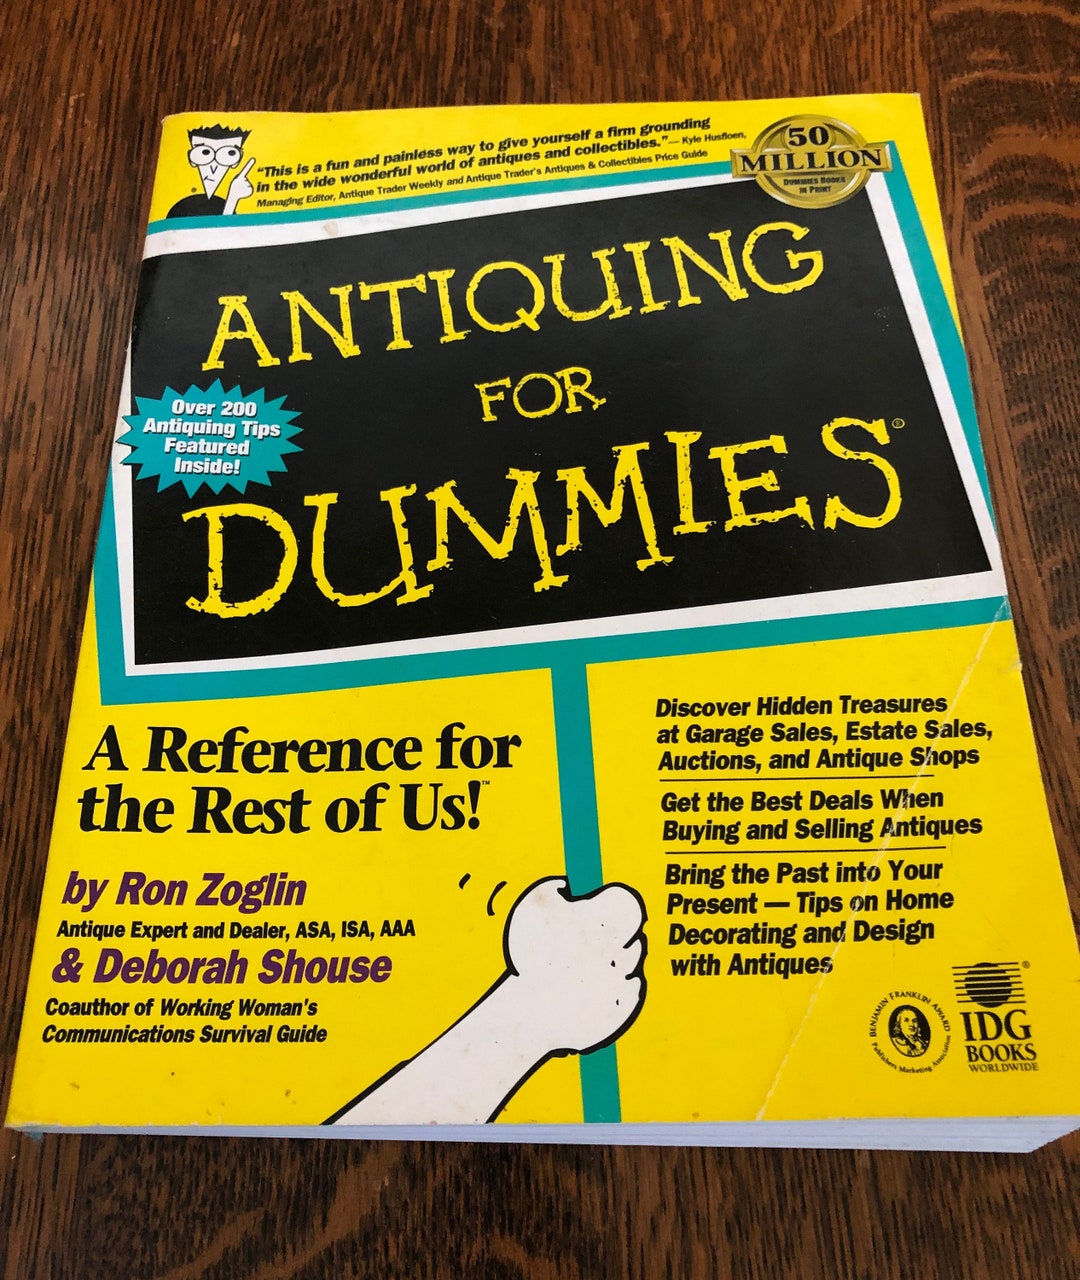 Price It Yourself! The Definitive, Down-to-earth Guide to Appraising  Antiques and Collectibles in your Home, at Auctions, Estate Sales, Shops,  and